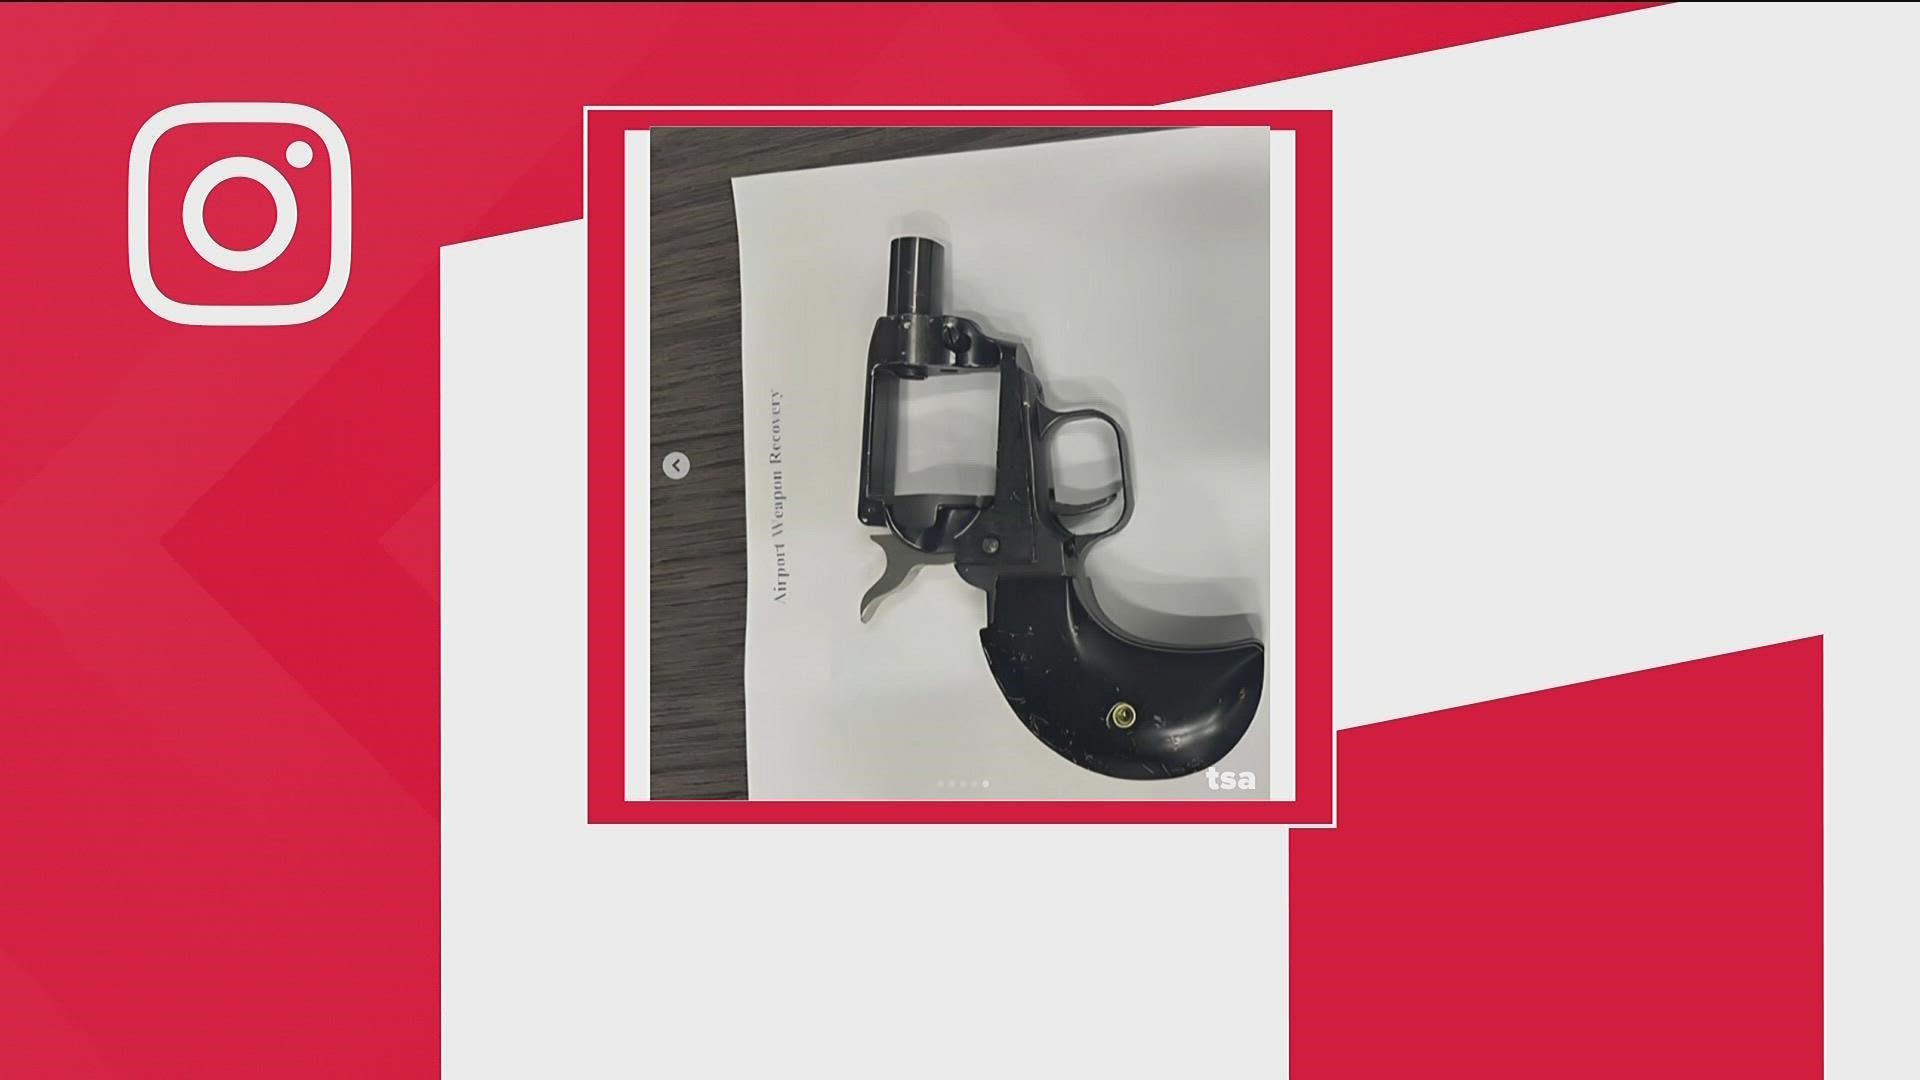 Security said they were able to "power down this passenger's poor packing choice" after a revolver was found inside the device.